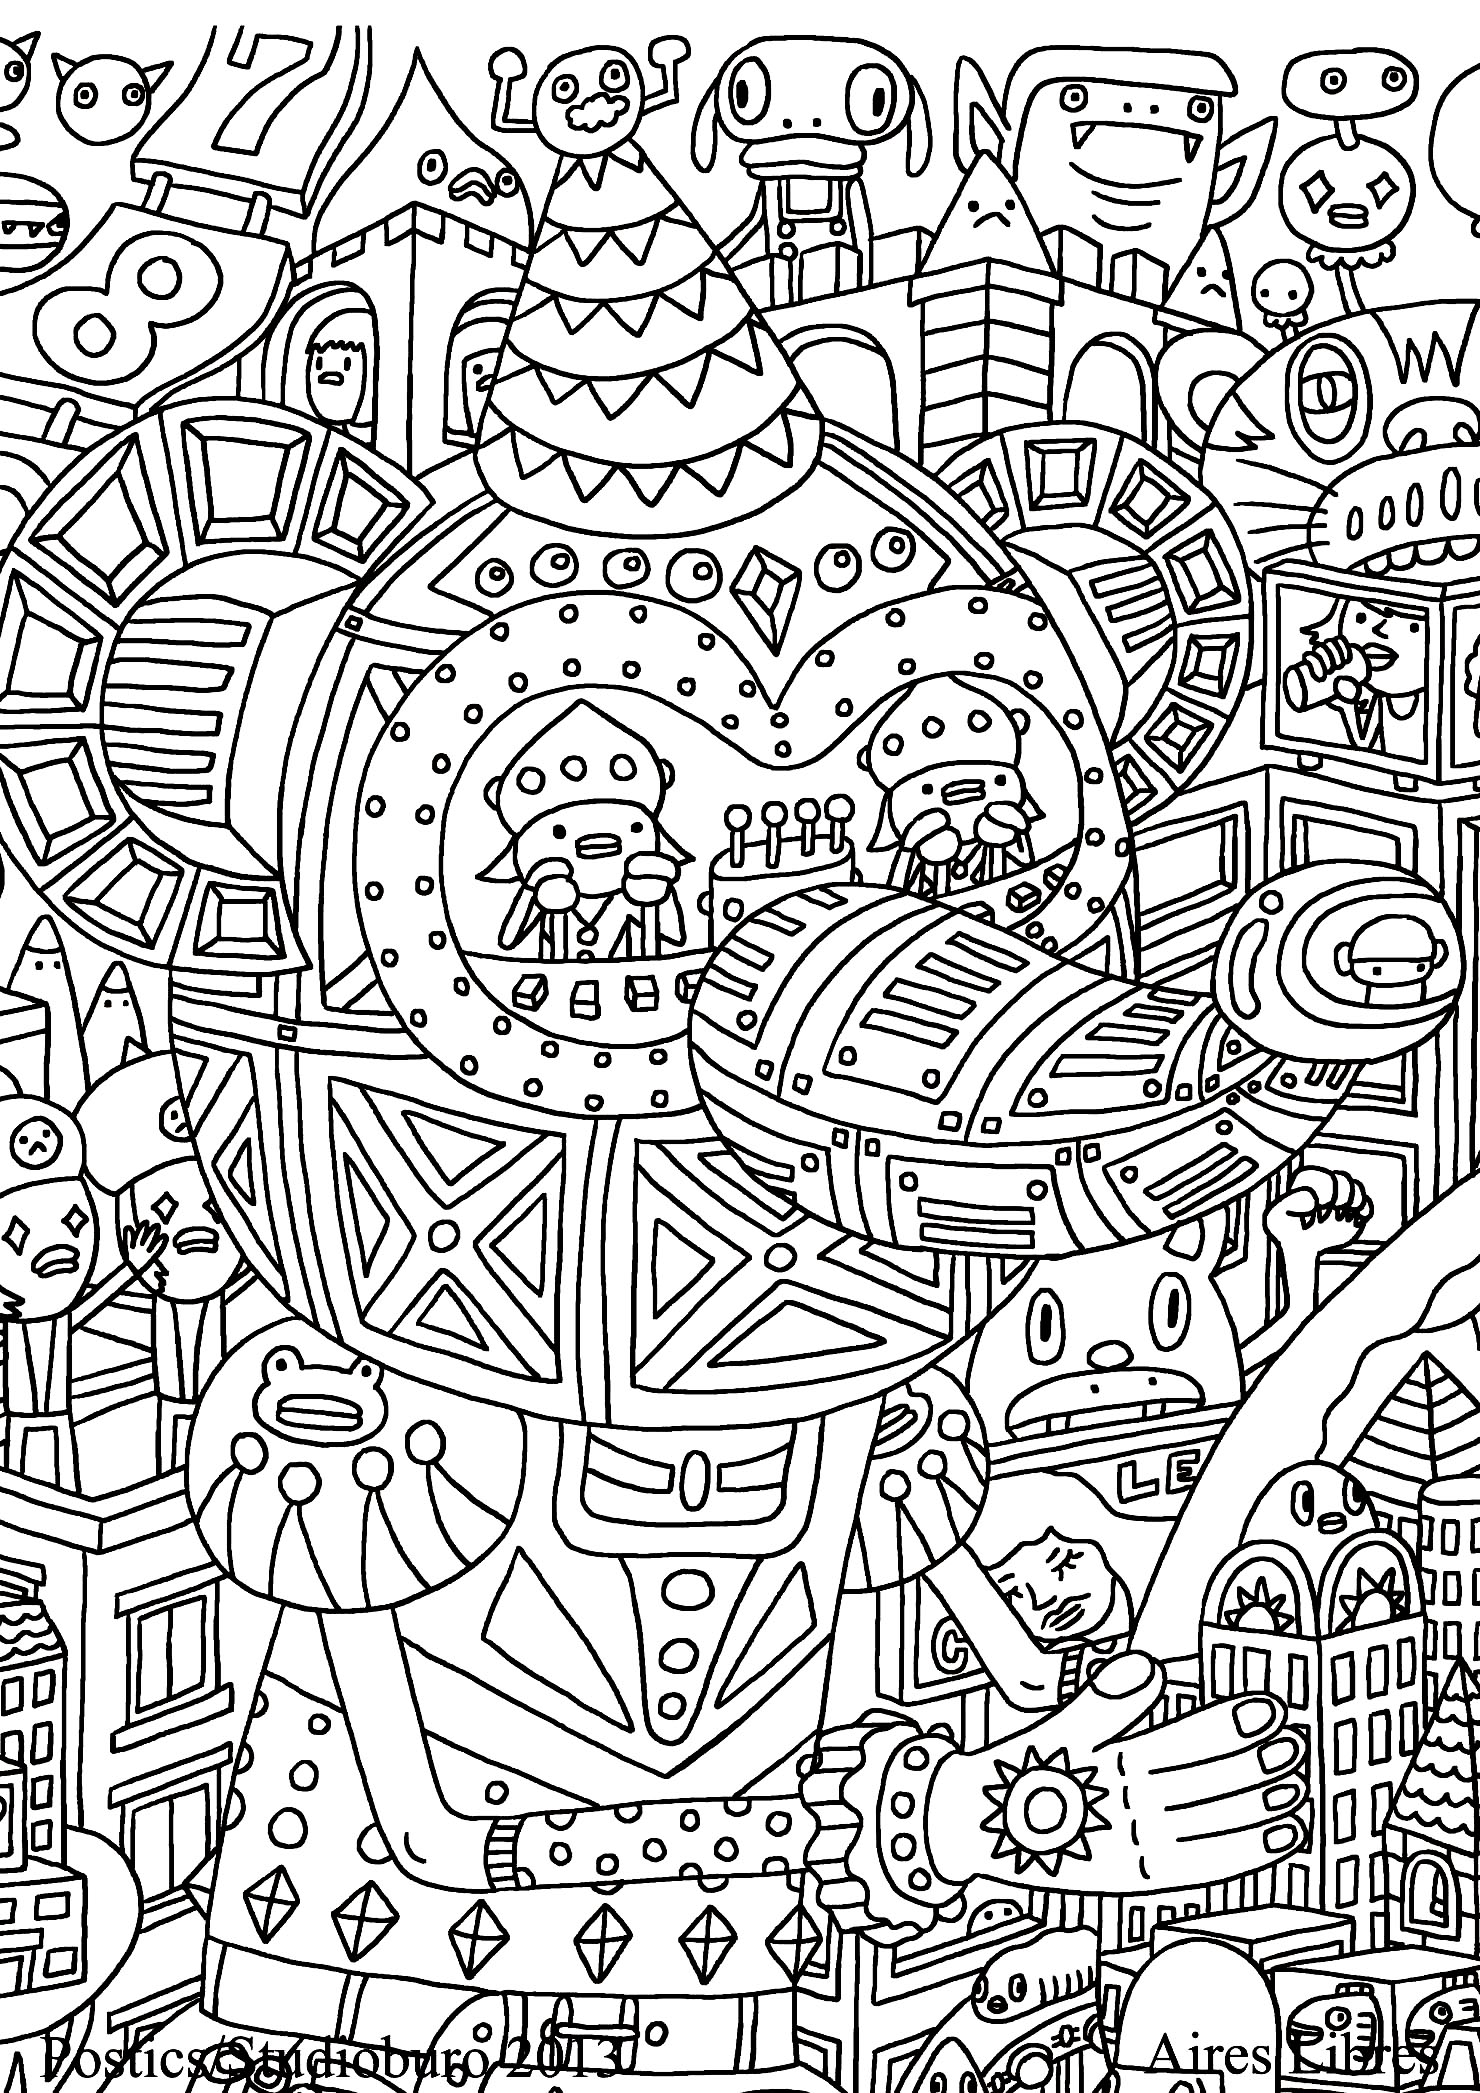 Very complex coloring page of an imaginary city with robots and other strange creatures - 1